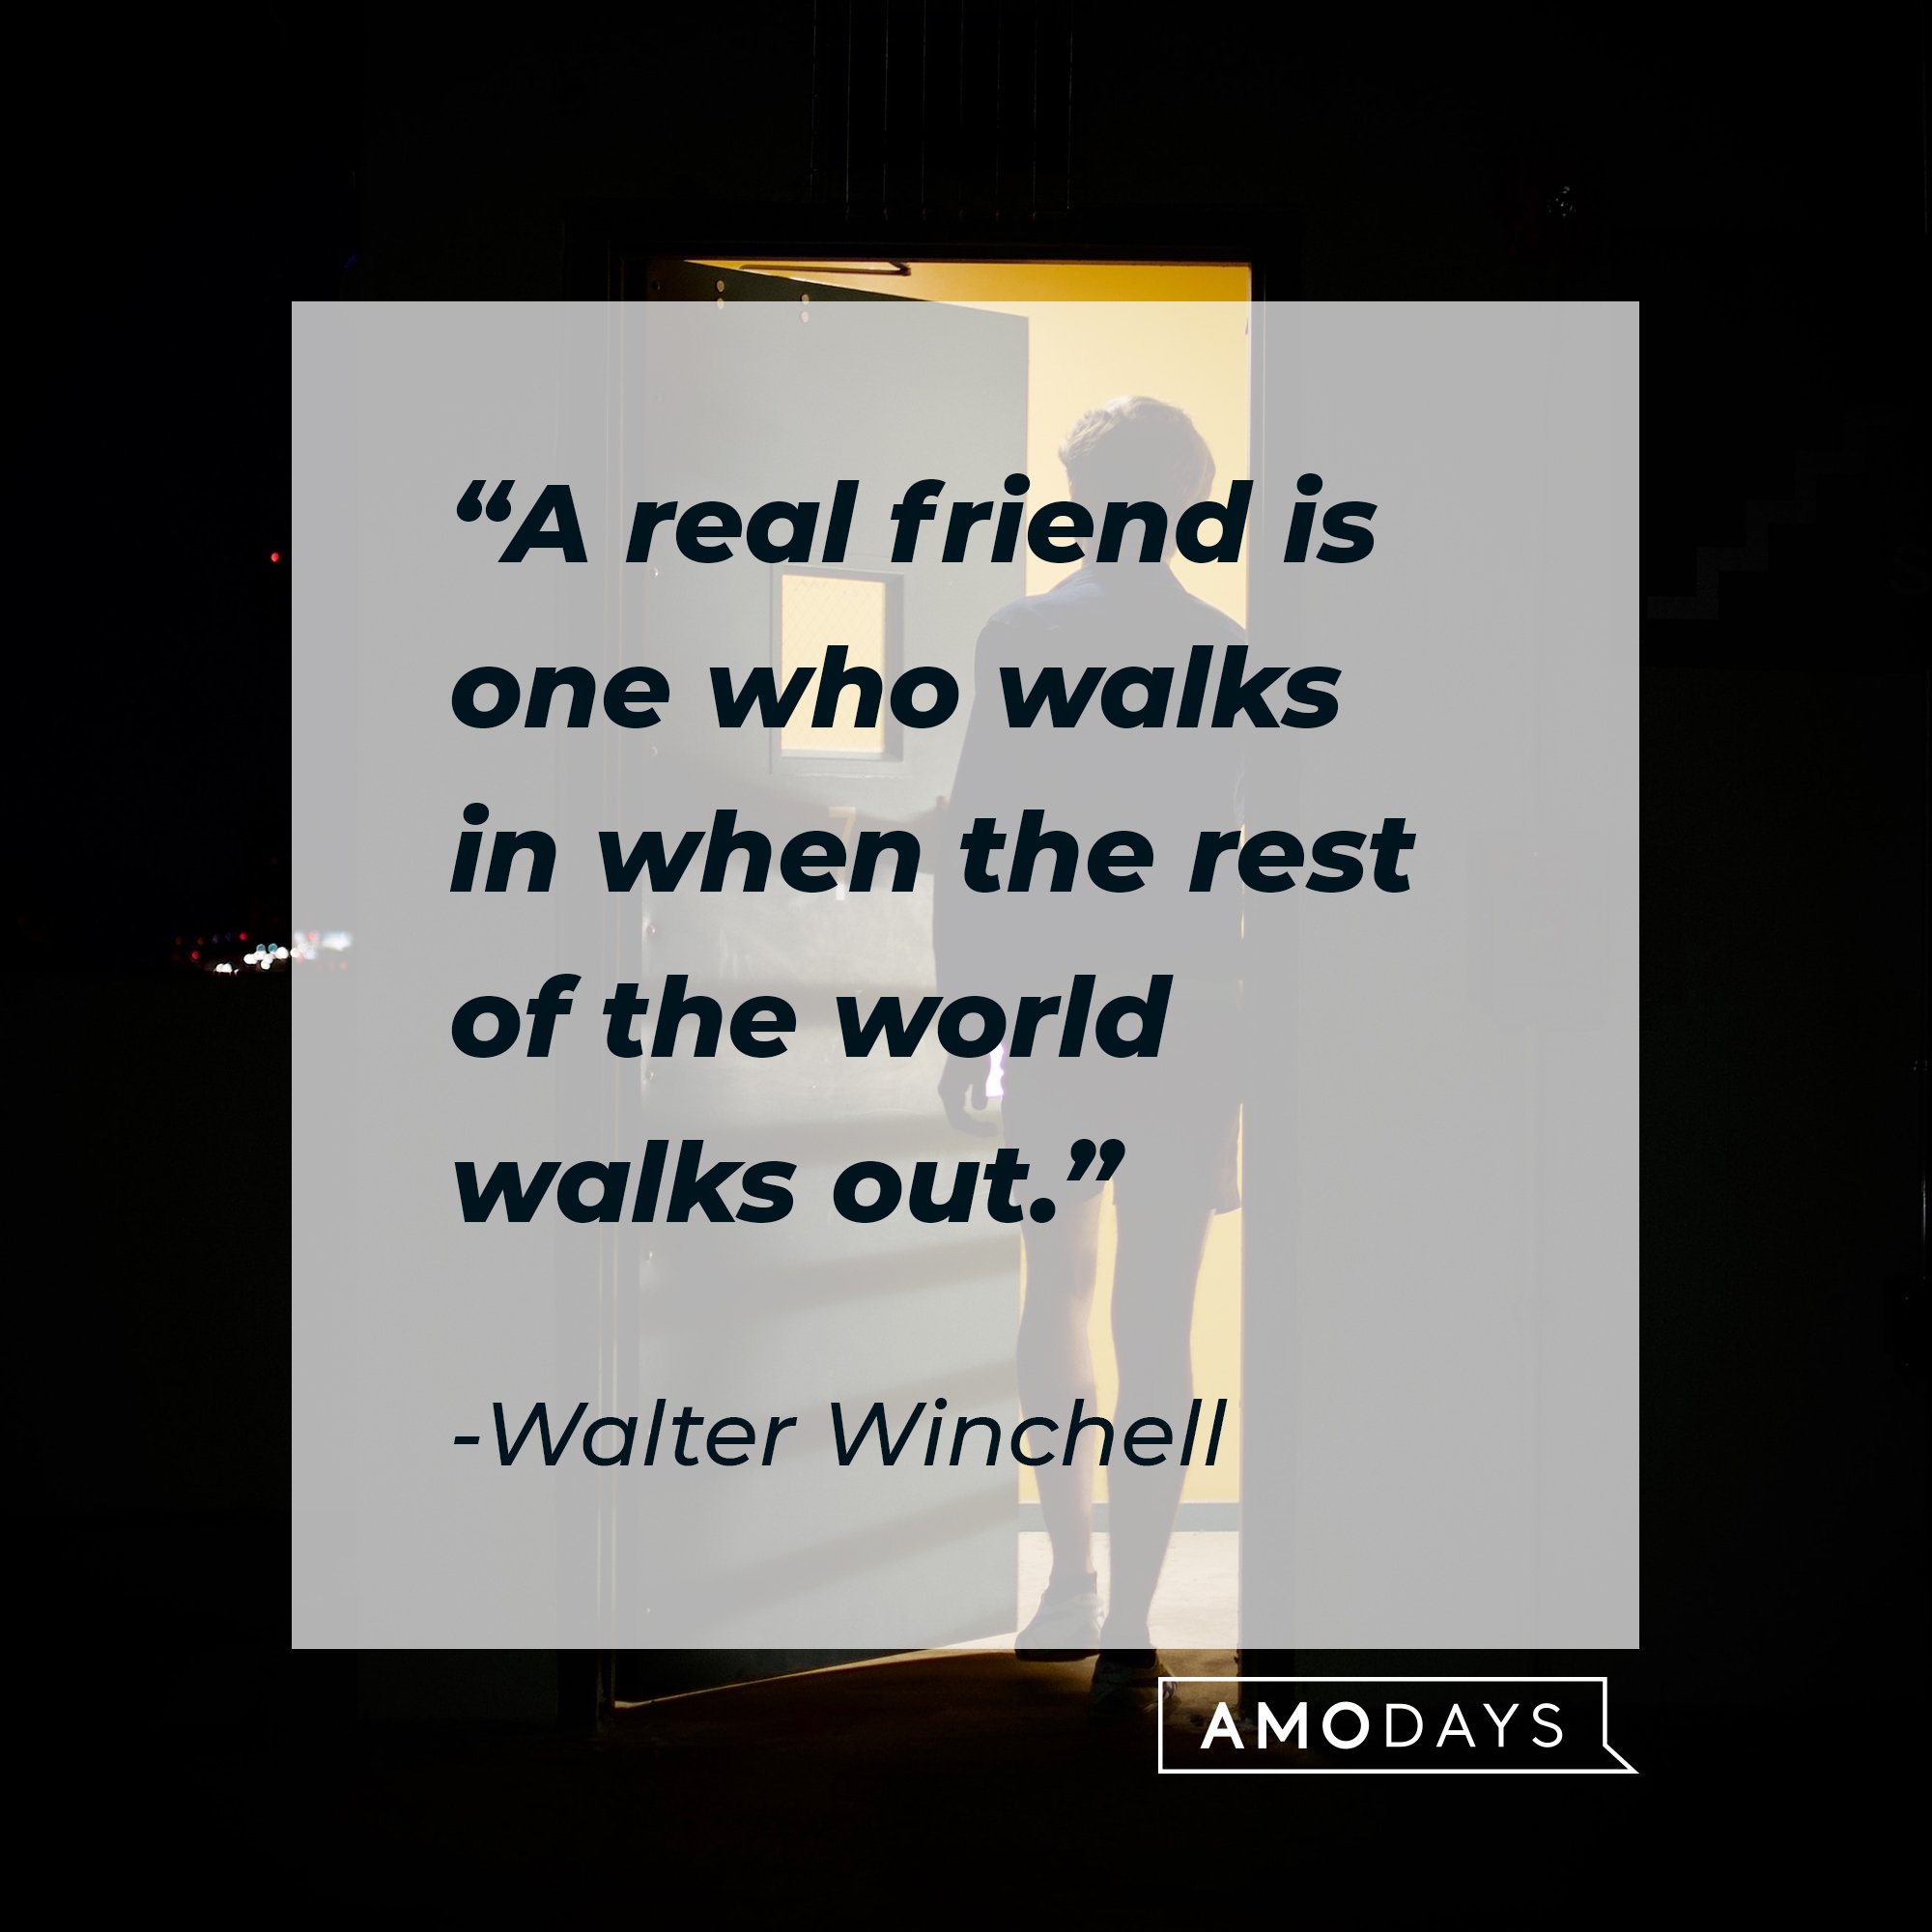 Walter Winchell’s “A real friend is one who walks in when the rest of the world walks out.”  | Image: AmoDays